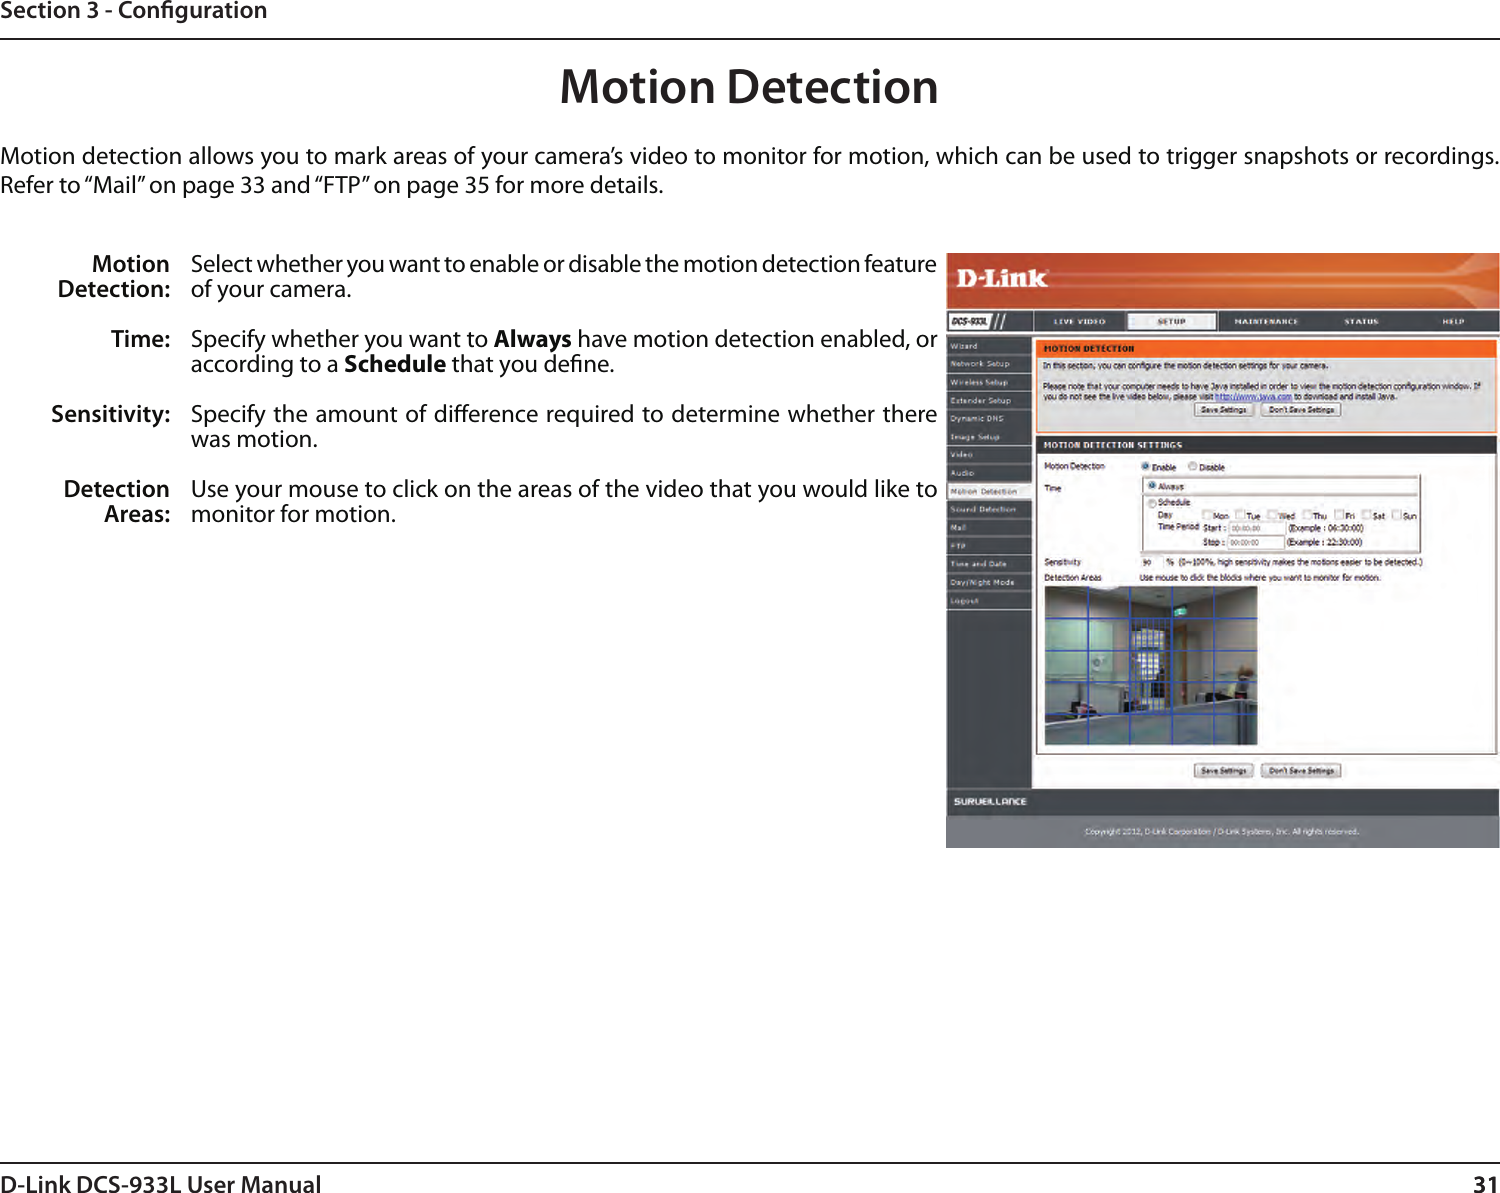 31D-Link DCS-933L User Manual 31Section 3 - CongurationMotion DetectionMotion detection allows you to mark areas of your camera’s video to monitor for motion, which can be used to trigger snapshots or recordings. Refer to “Mail” on page 33 and “FTP” on page 35 for more details.Motion Detection:Time:Sensitivity:Detection Areas:Select whether you want to enable or disable the motion detection feature of your camera.Specify whether you want to Always have motion detection enabled, or according to a Schedule that you dene.Specify the amount of dierence required to determine whether there was motion.Use your mouse to click on the areas of the video that you would like to monitor for motion. 